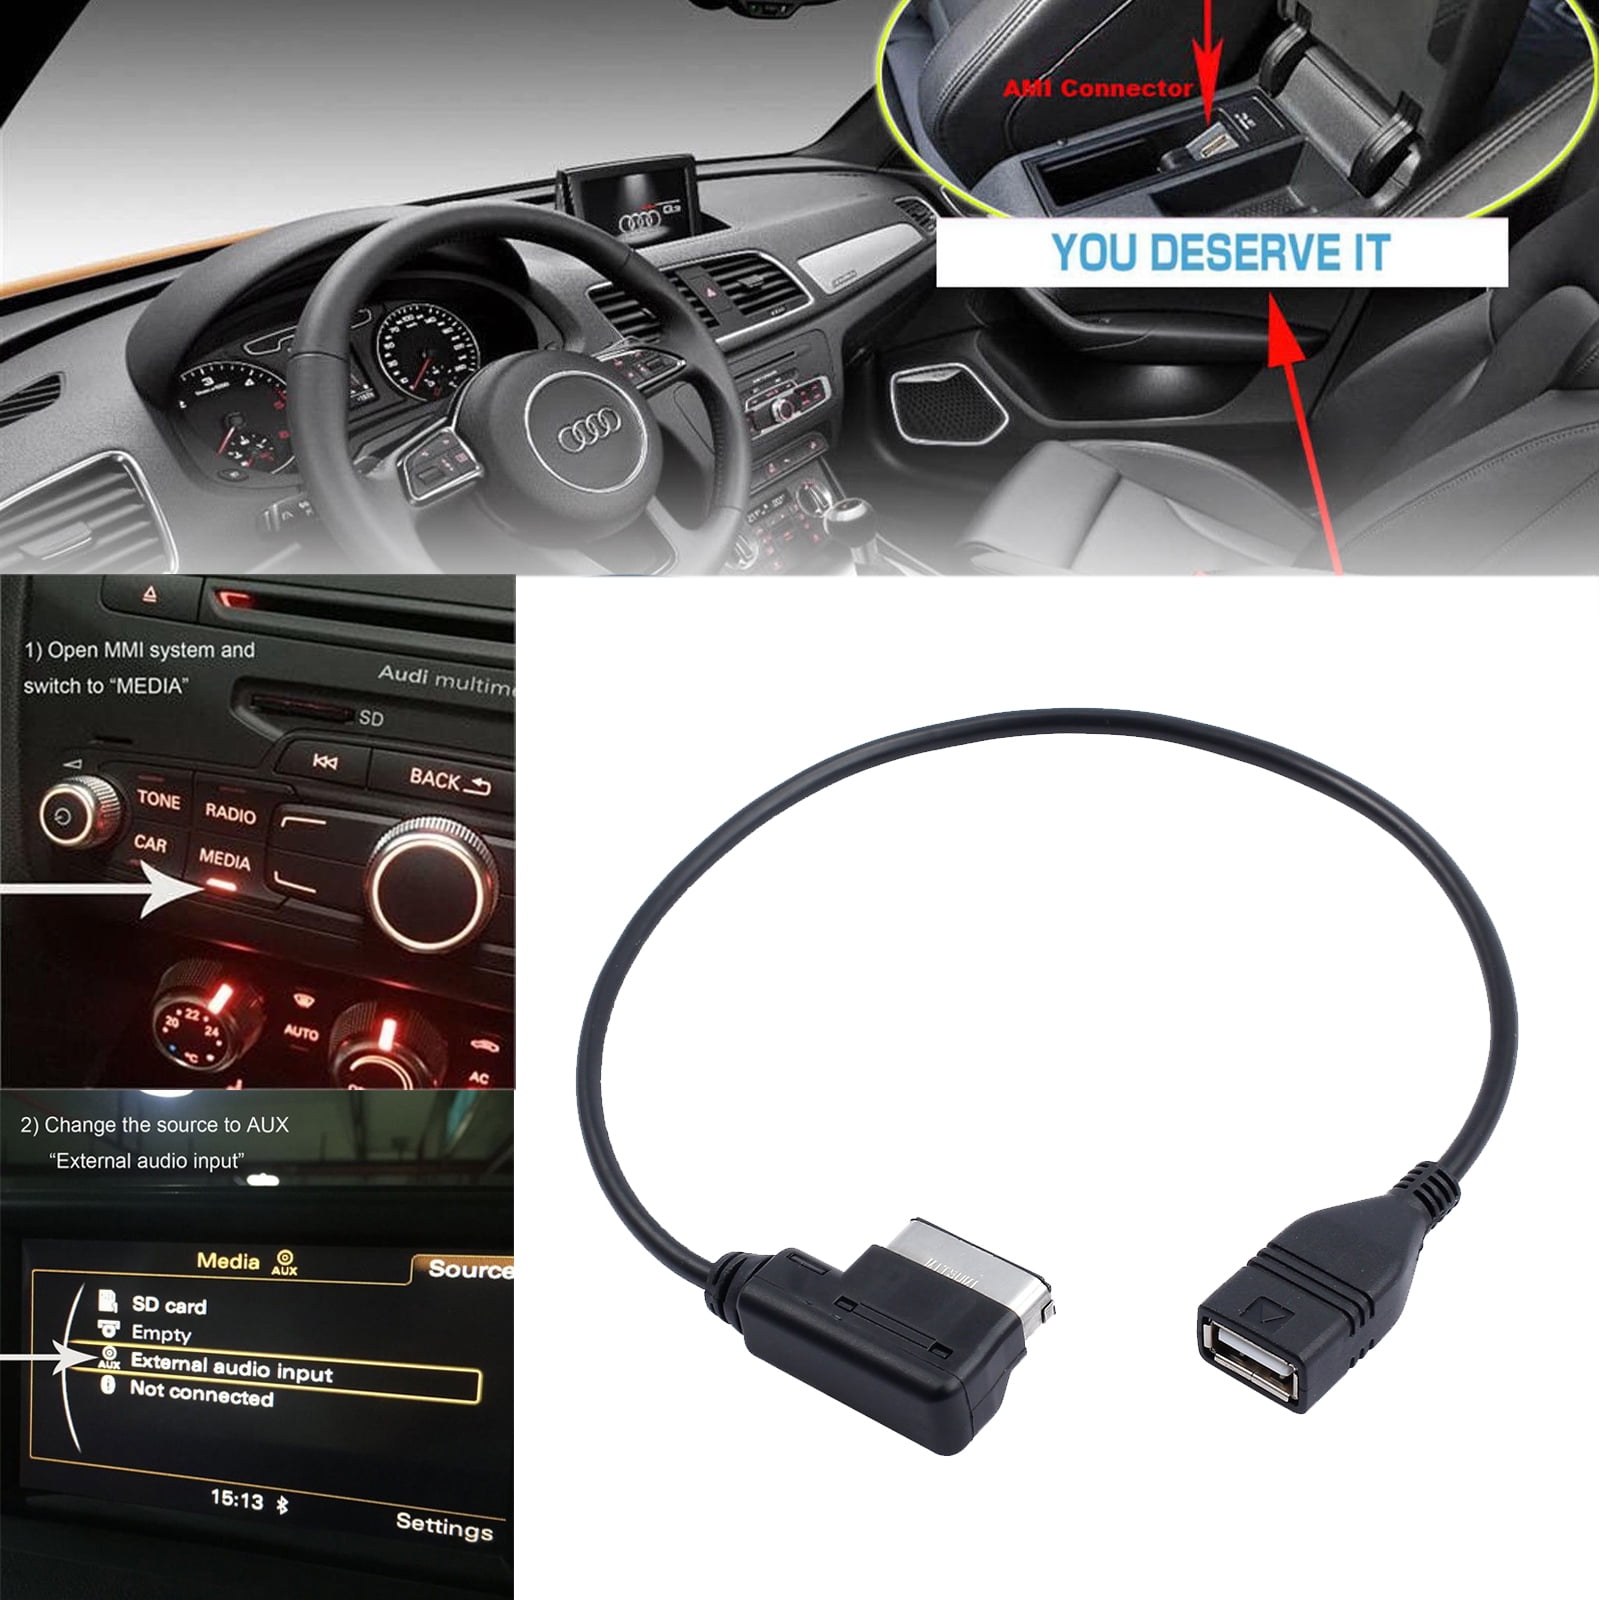 AMI MDI Bluetooth Music AUX Interface Adapter Cable USB Fit for AUDI VW 2010-16 